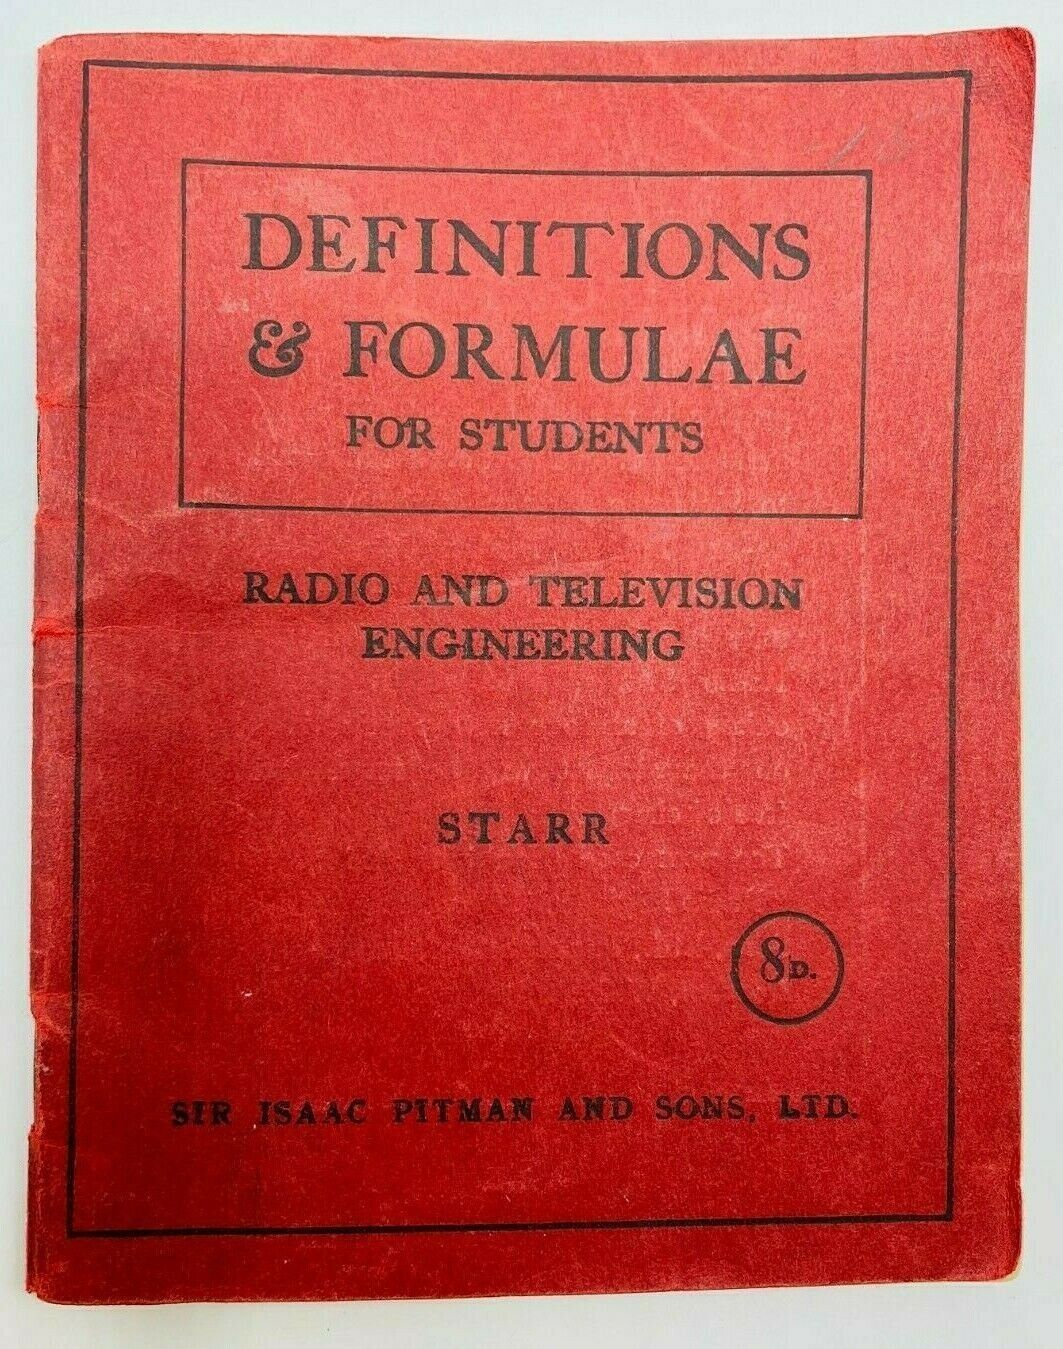 Starr Definitions & Formulae for Students Radio and Television Engineering    